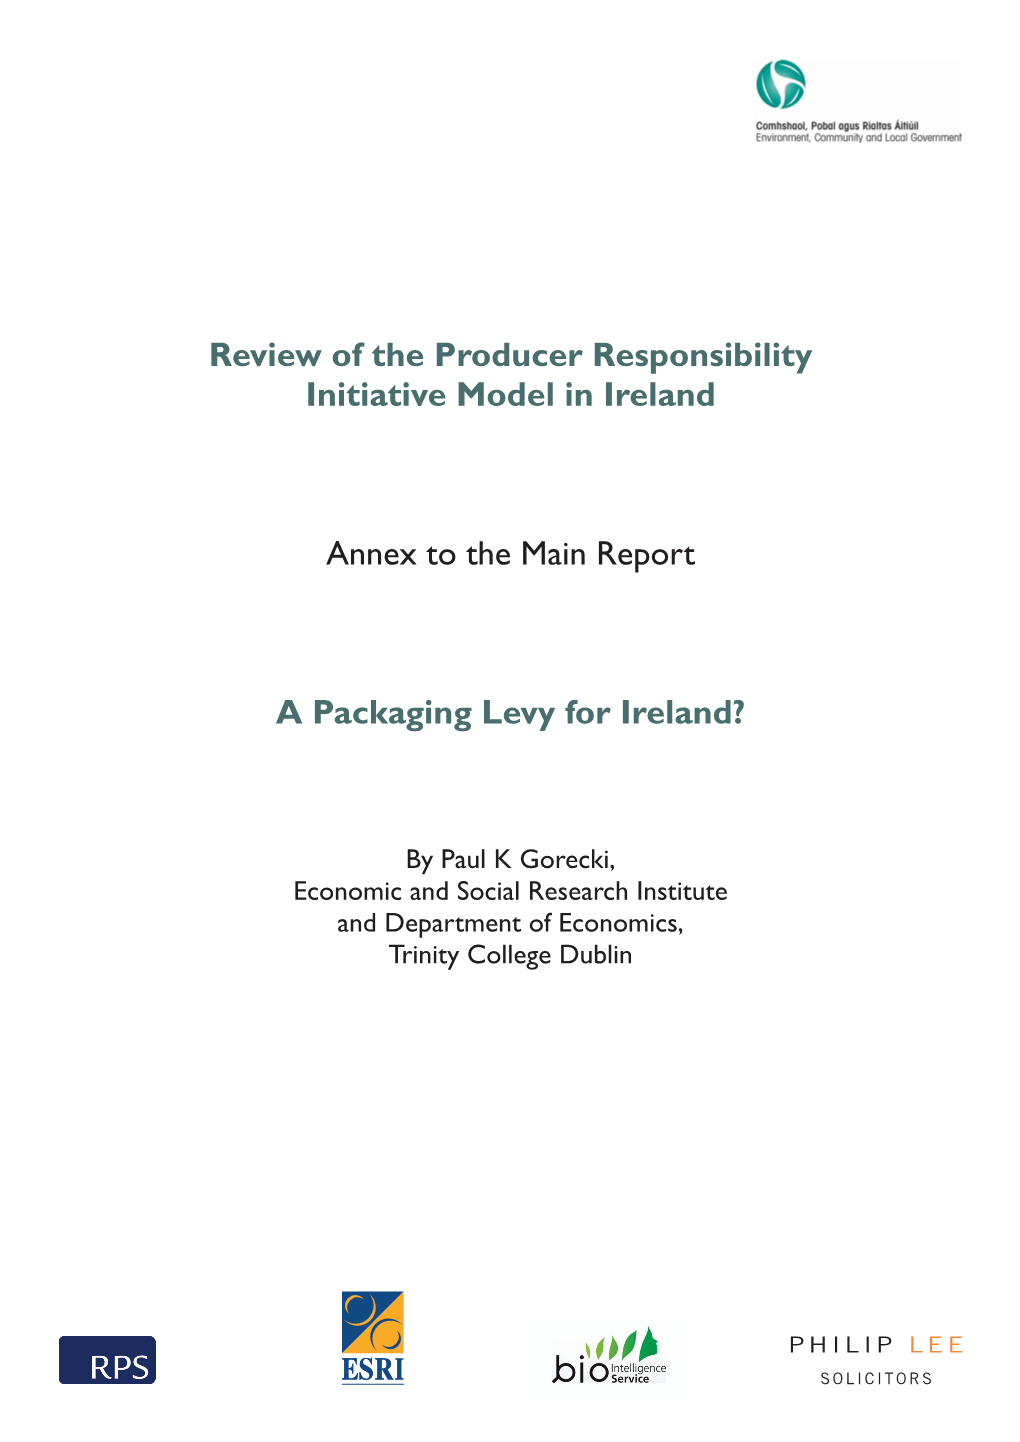 A Packaging Levy for Ireland?